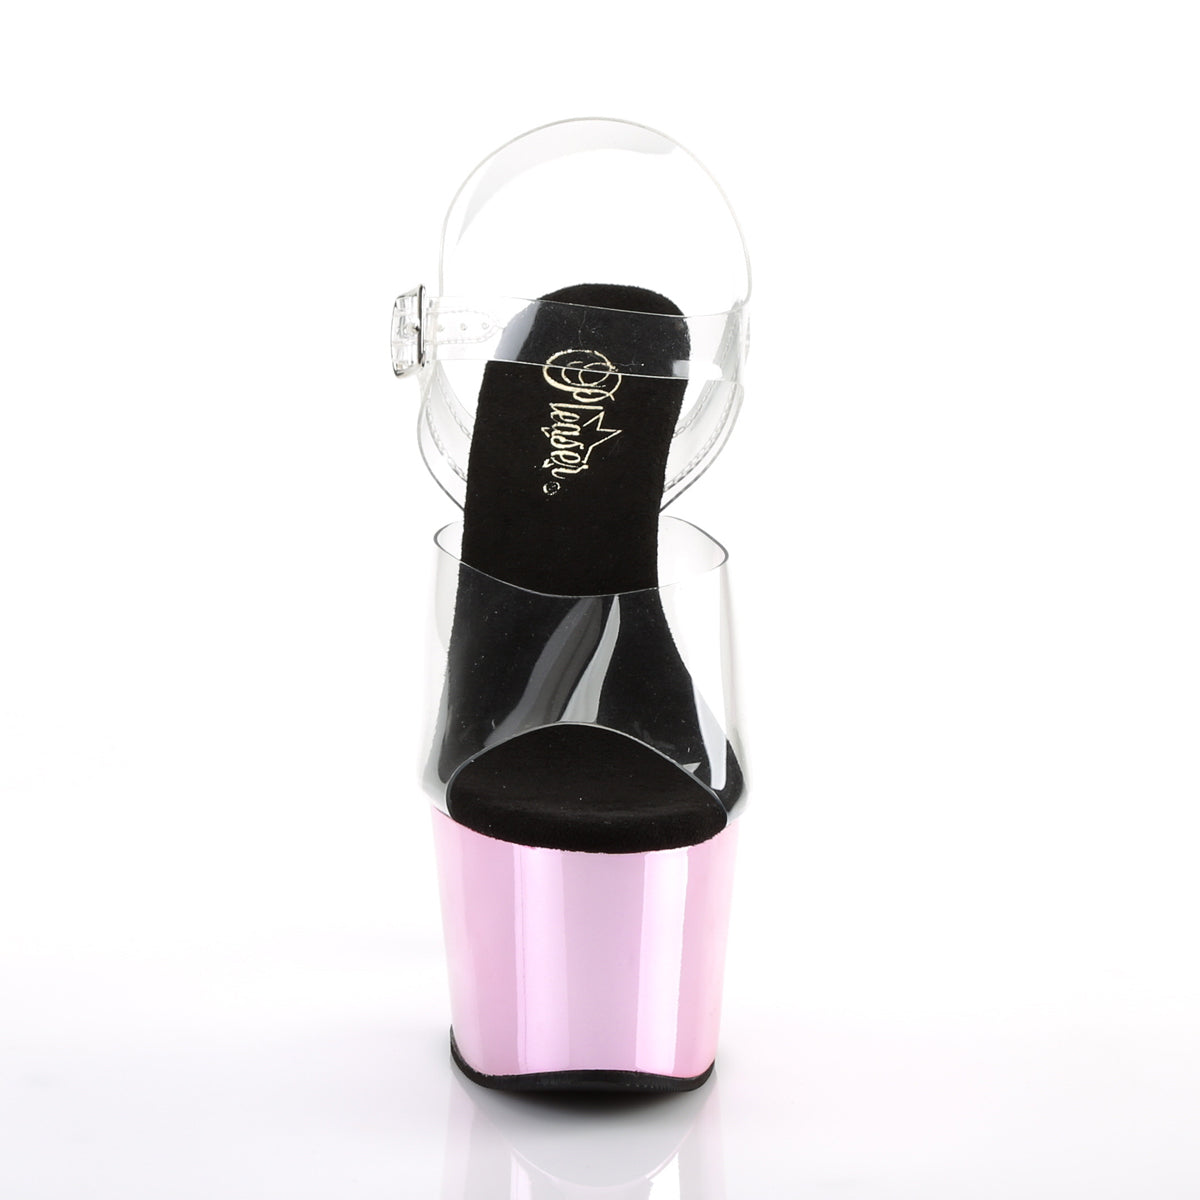 ADORE-708 7" Heel Clear & Baby Pink Chrome Pole Dancer Shoes-Pleaser- Sexy Shoes Alternative Footwear